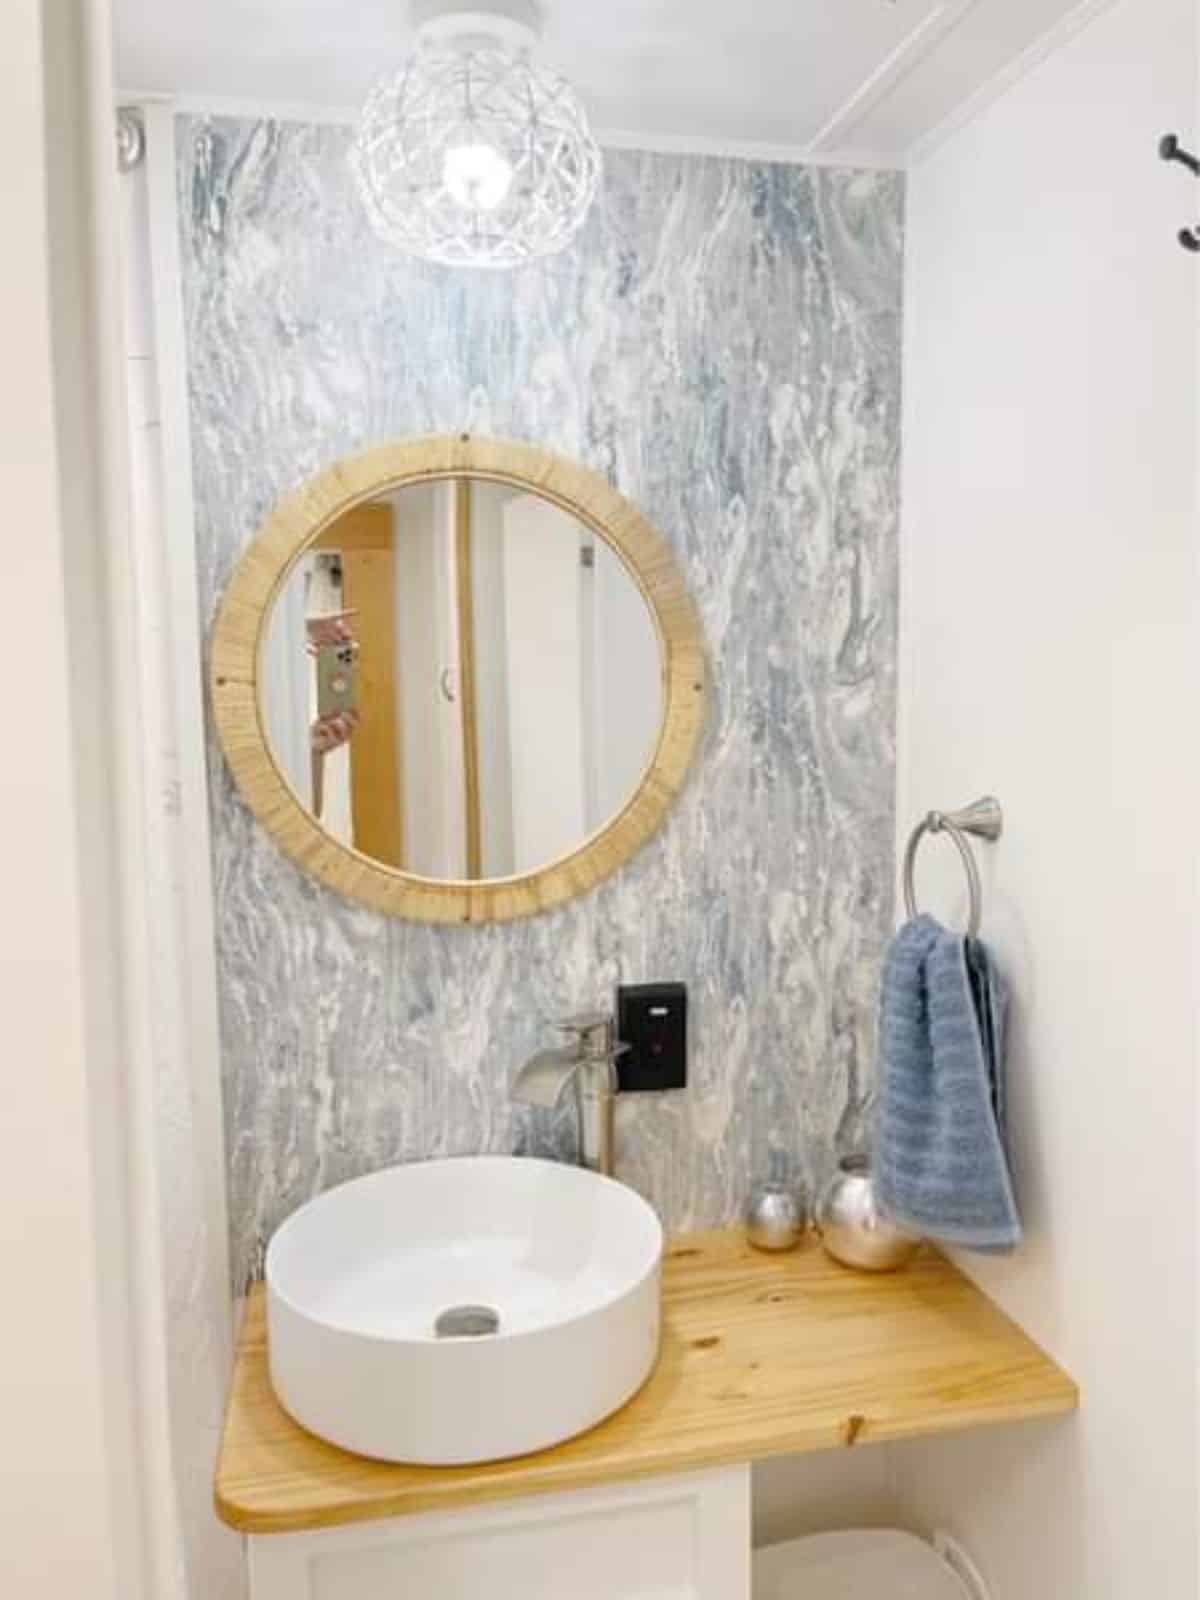 Bathroom of 32' Renovated Tiny Home On Wheels is very gorgeous and stylish